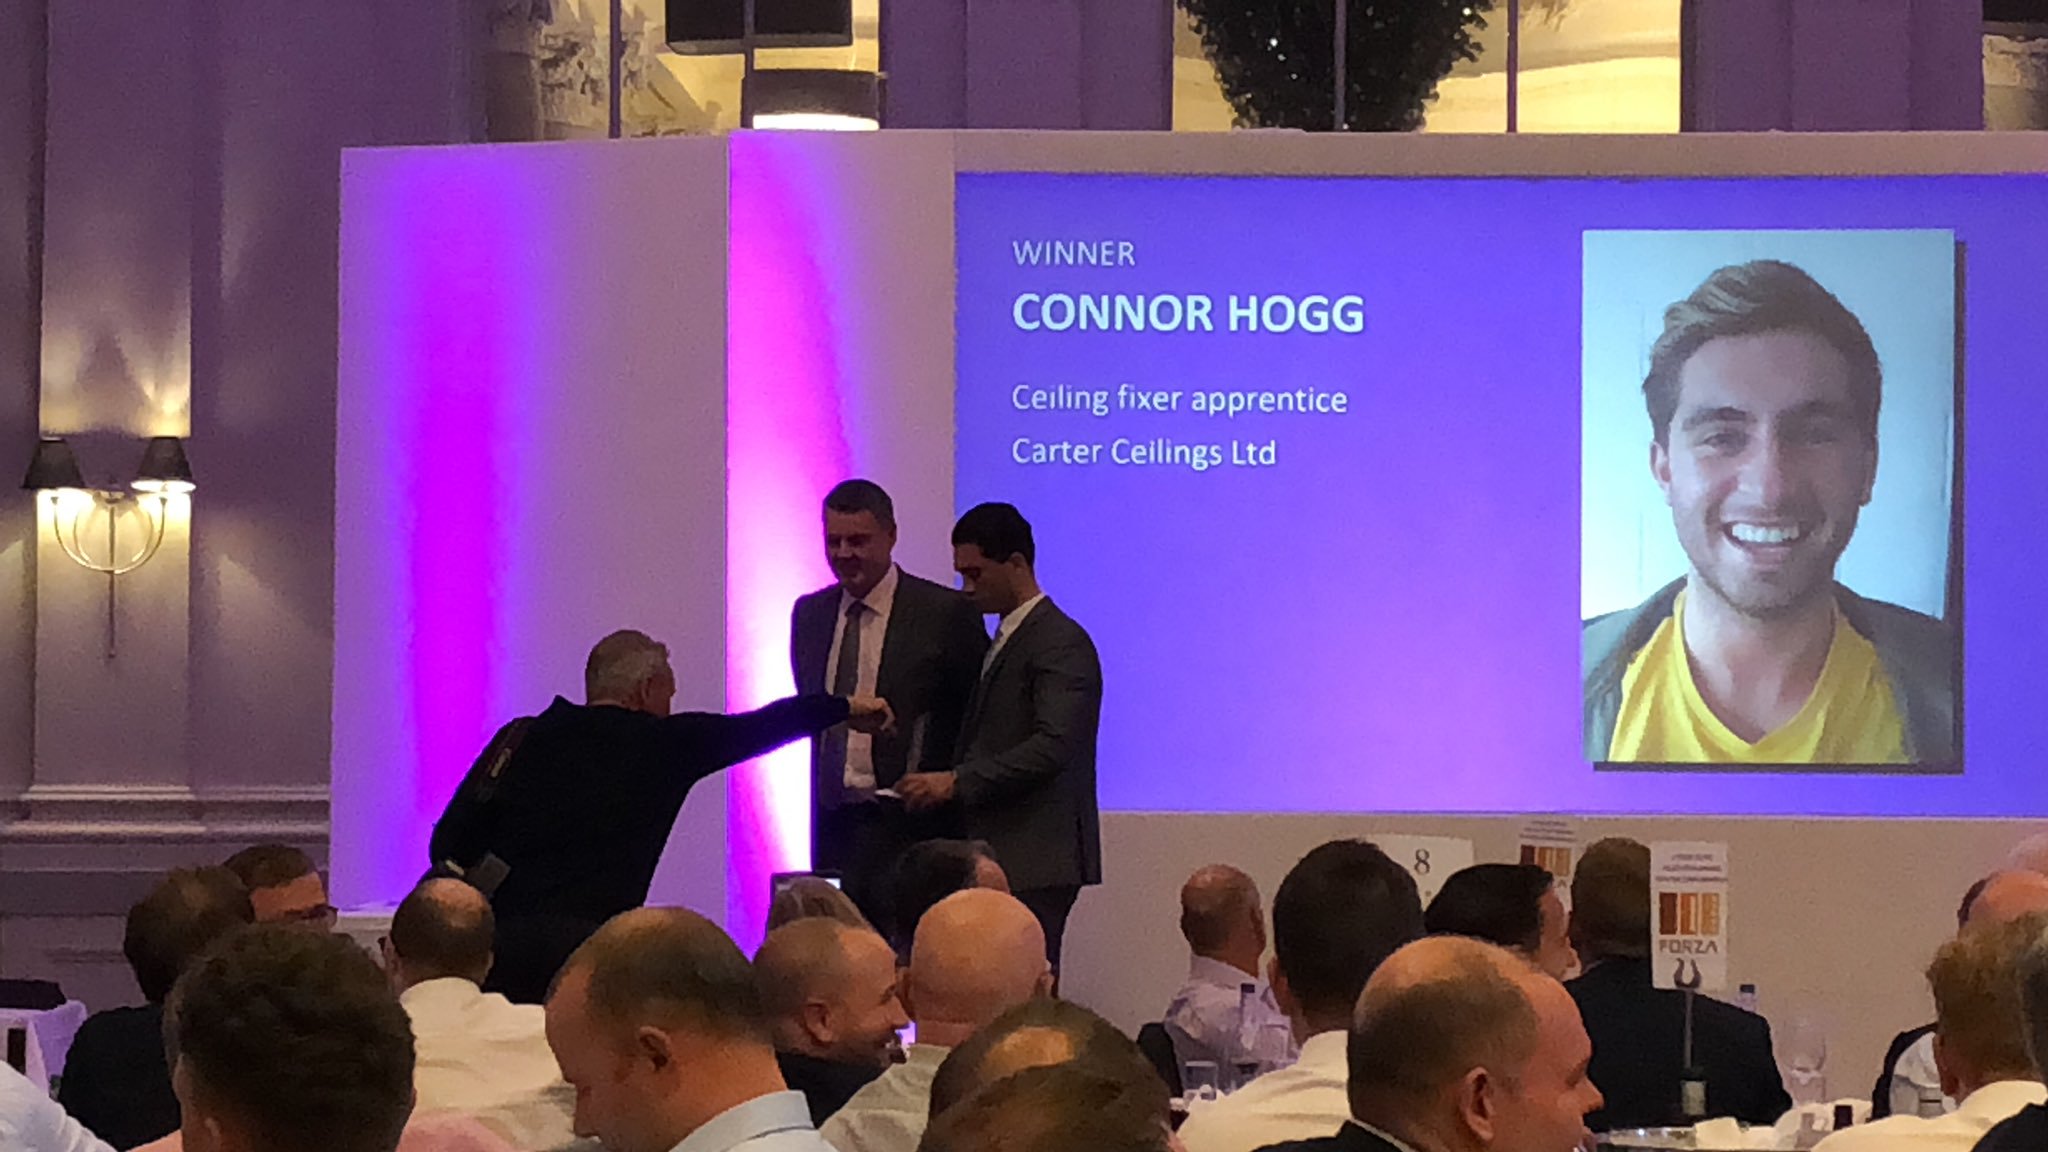 FIS Awards Scottish Apprentice of the Year for 2019 is awarded to Connor Hogg